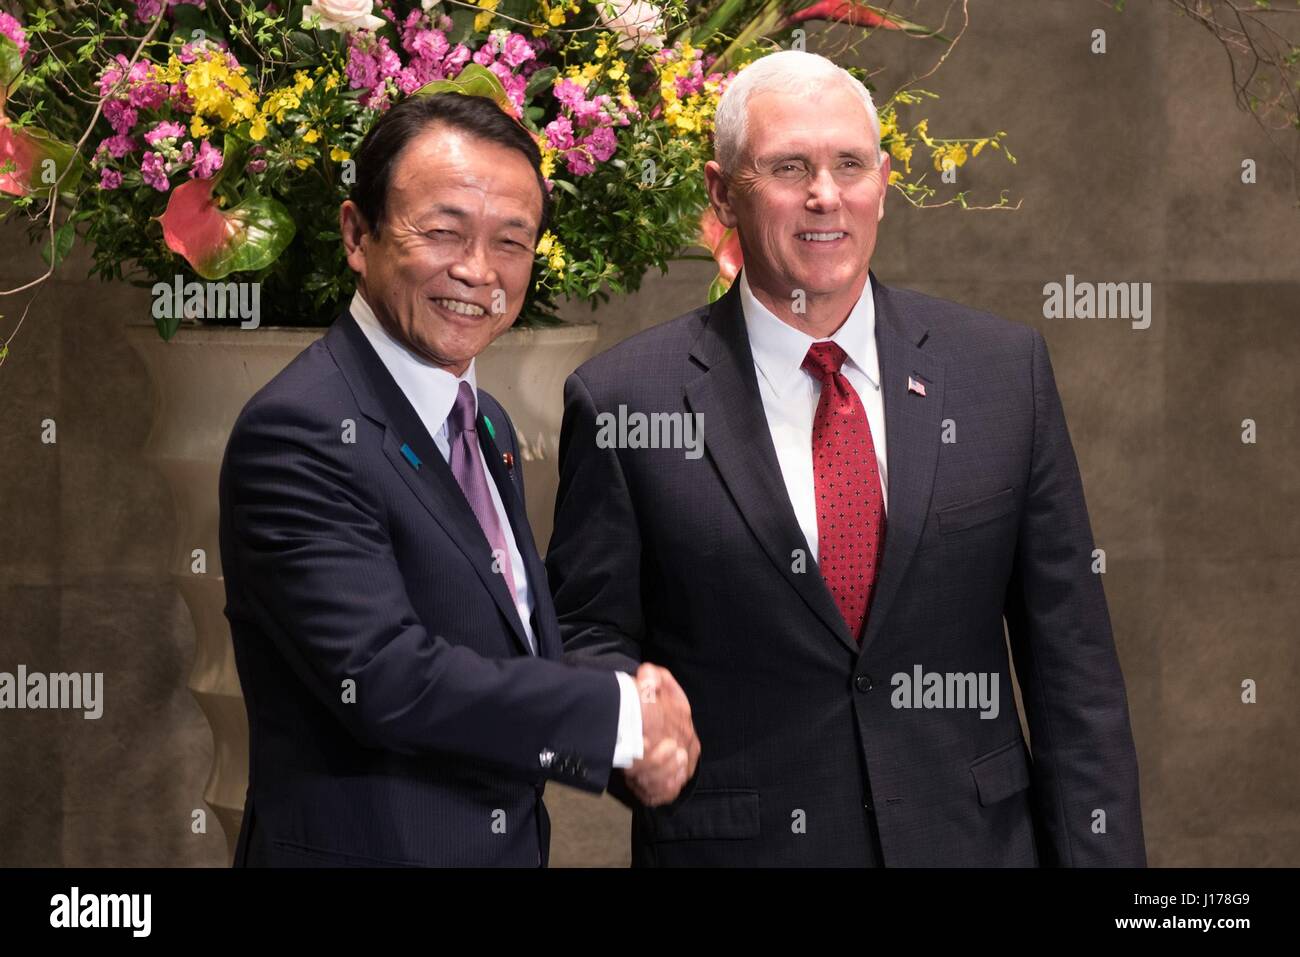 Tokyo, Japan. 18th Apr, 2017. U.S. Vice President Mike Pence, right, shakes hands with Japanese Finance Minister Taro Aso prior to the Japan-U.S. economic dialogue at the Prime Ministers Office April 18, 2017 in Tokyo, Japan. Pence is on his first official visit to Japan as vice president. Credit: Planetpix/Alamy Live News Stock Photo